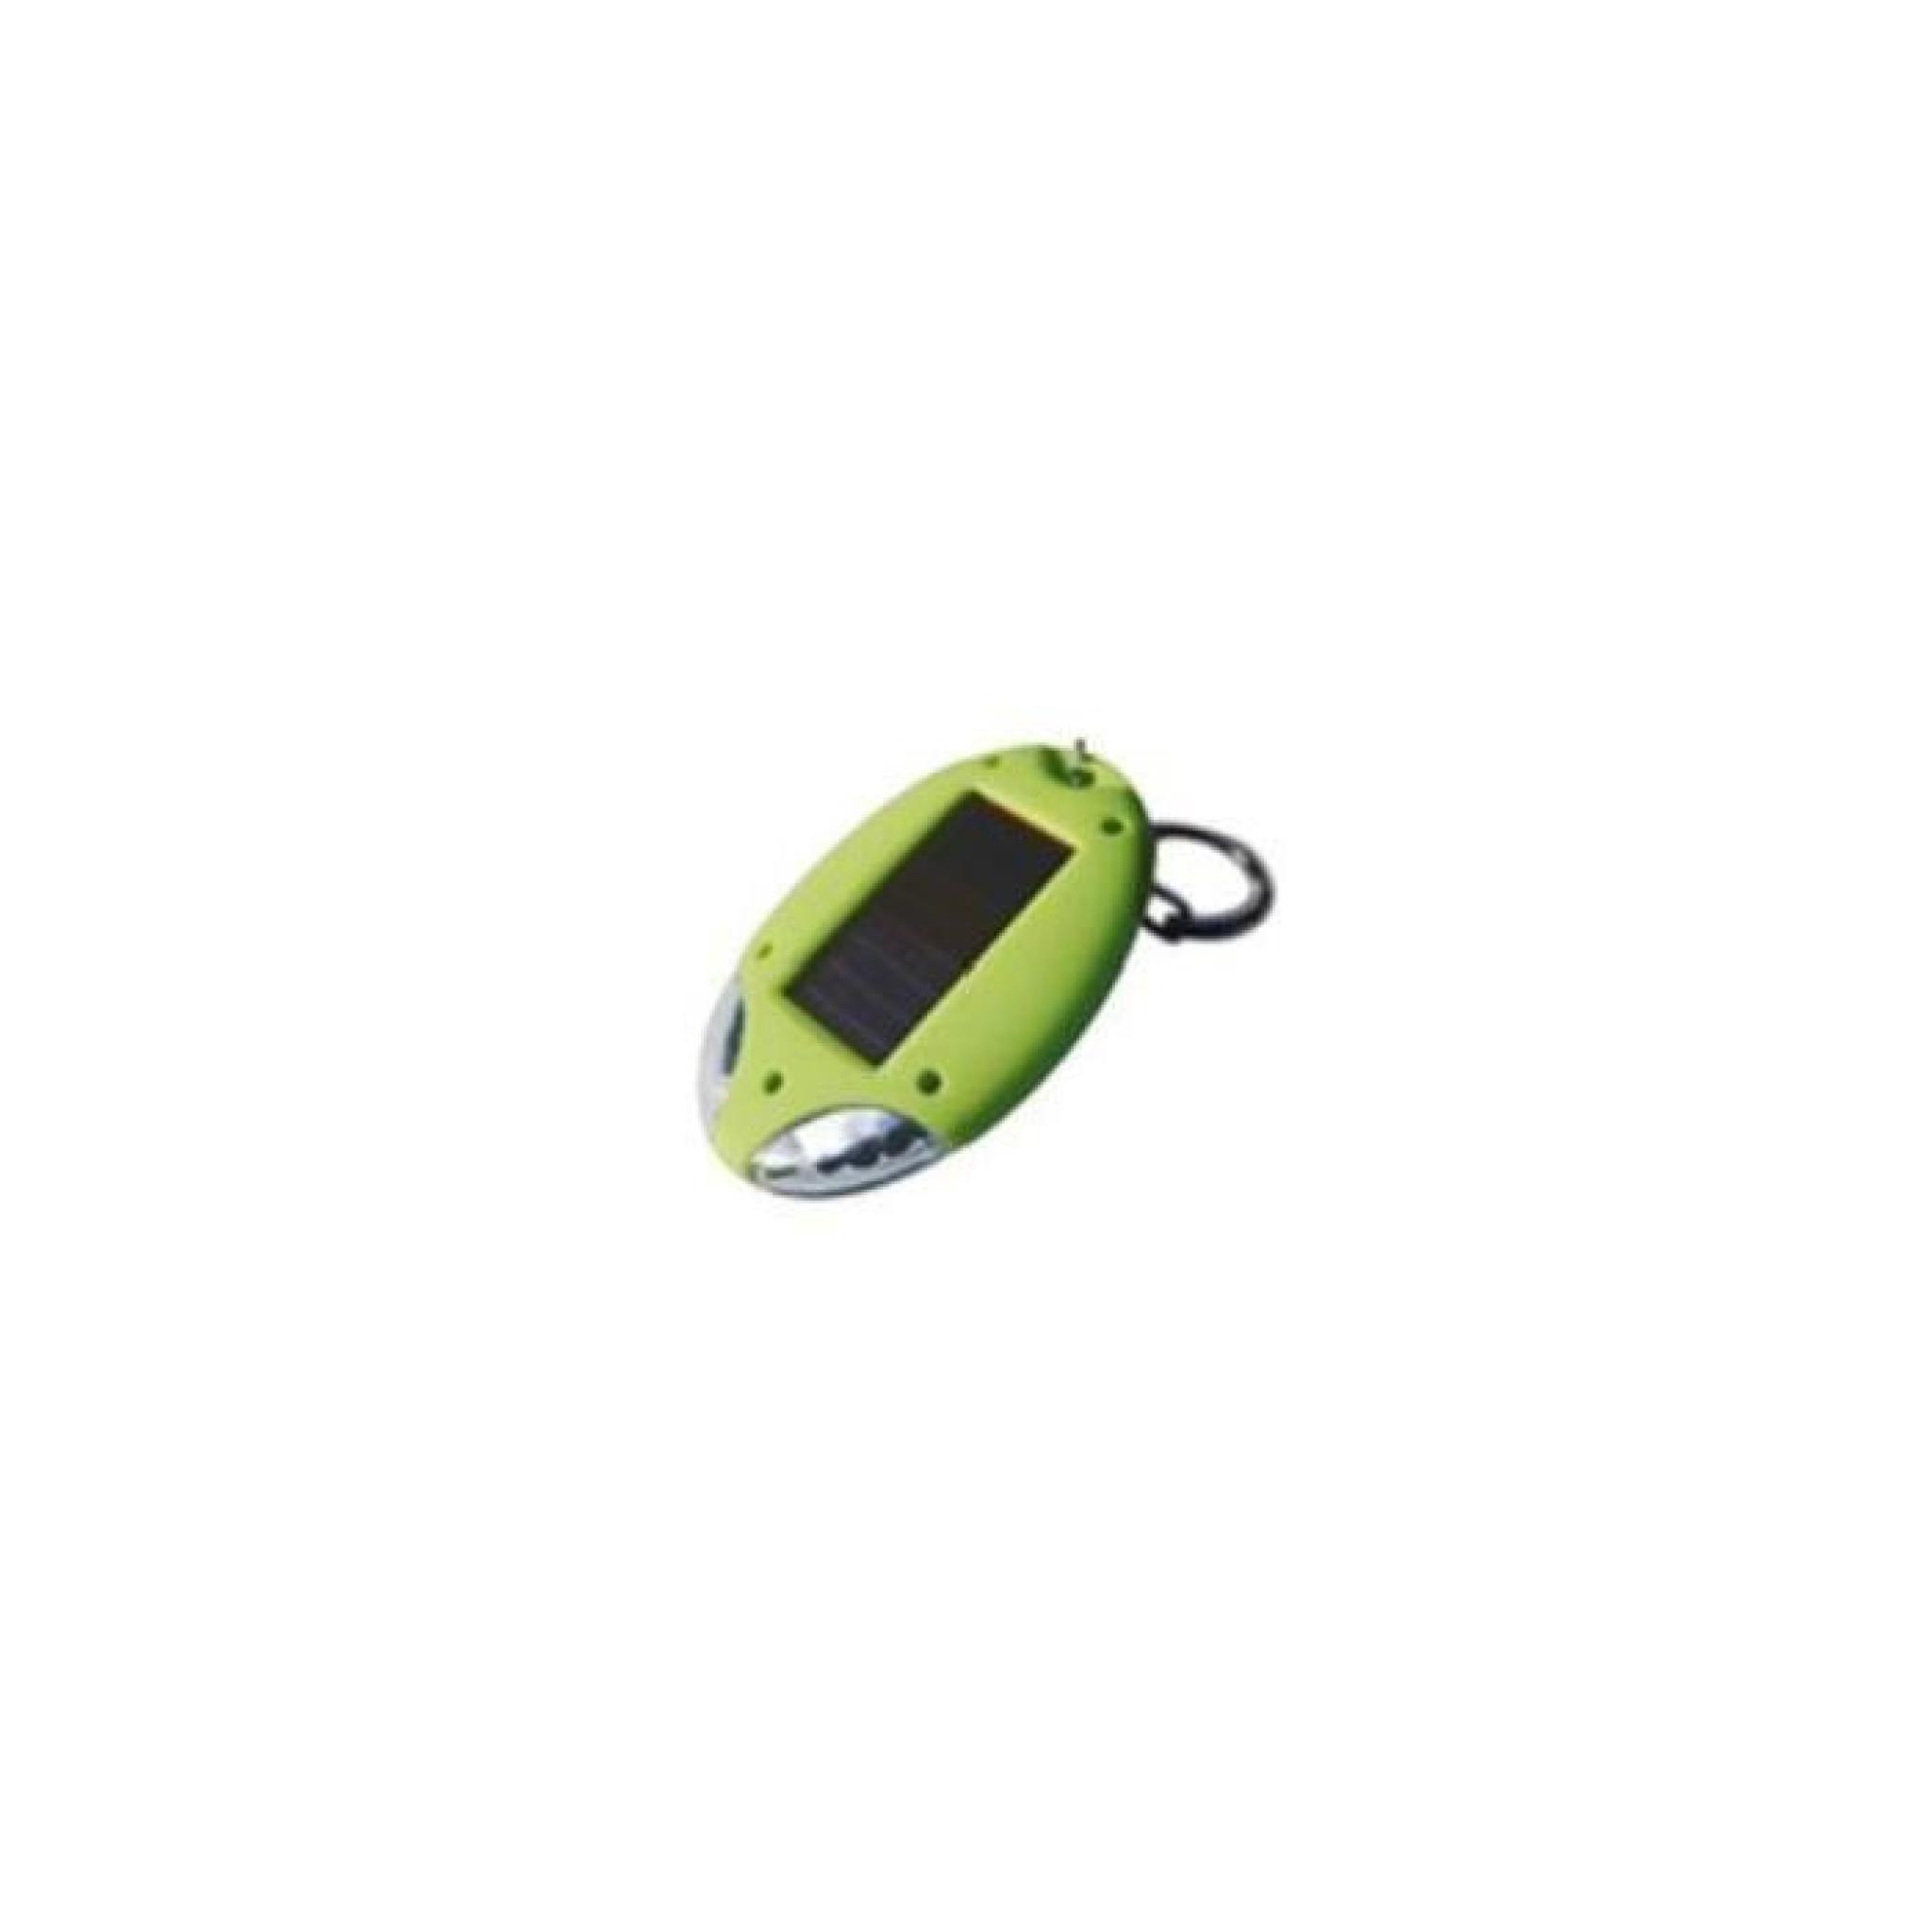 Lampe solaire vert anis